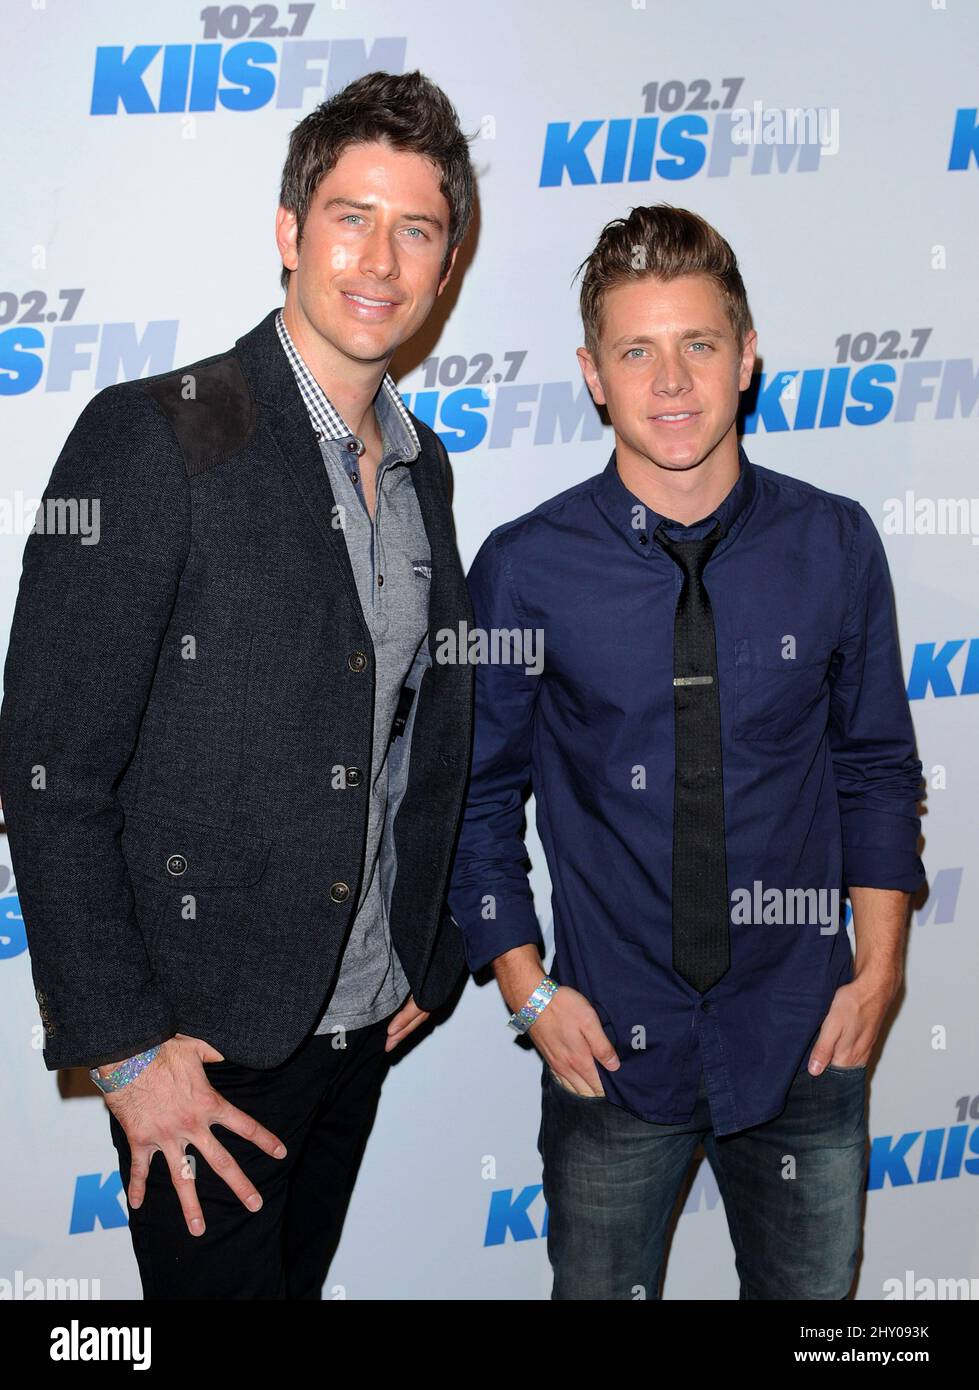 Arie Luyendyk and Jef Holm attending the 2012 KIIS FM 'Jingle Ball' Night 2 held at the Nokia Theatre in Los Angeles, USA. Stock Photo